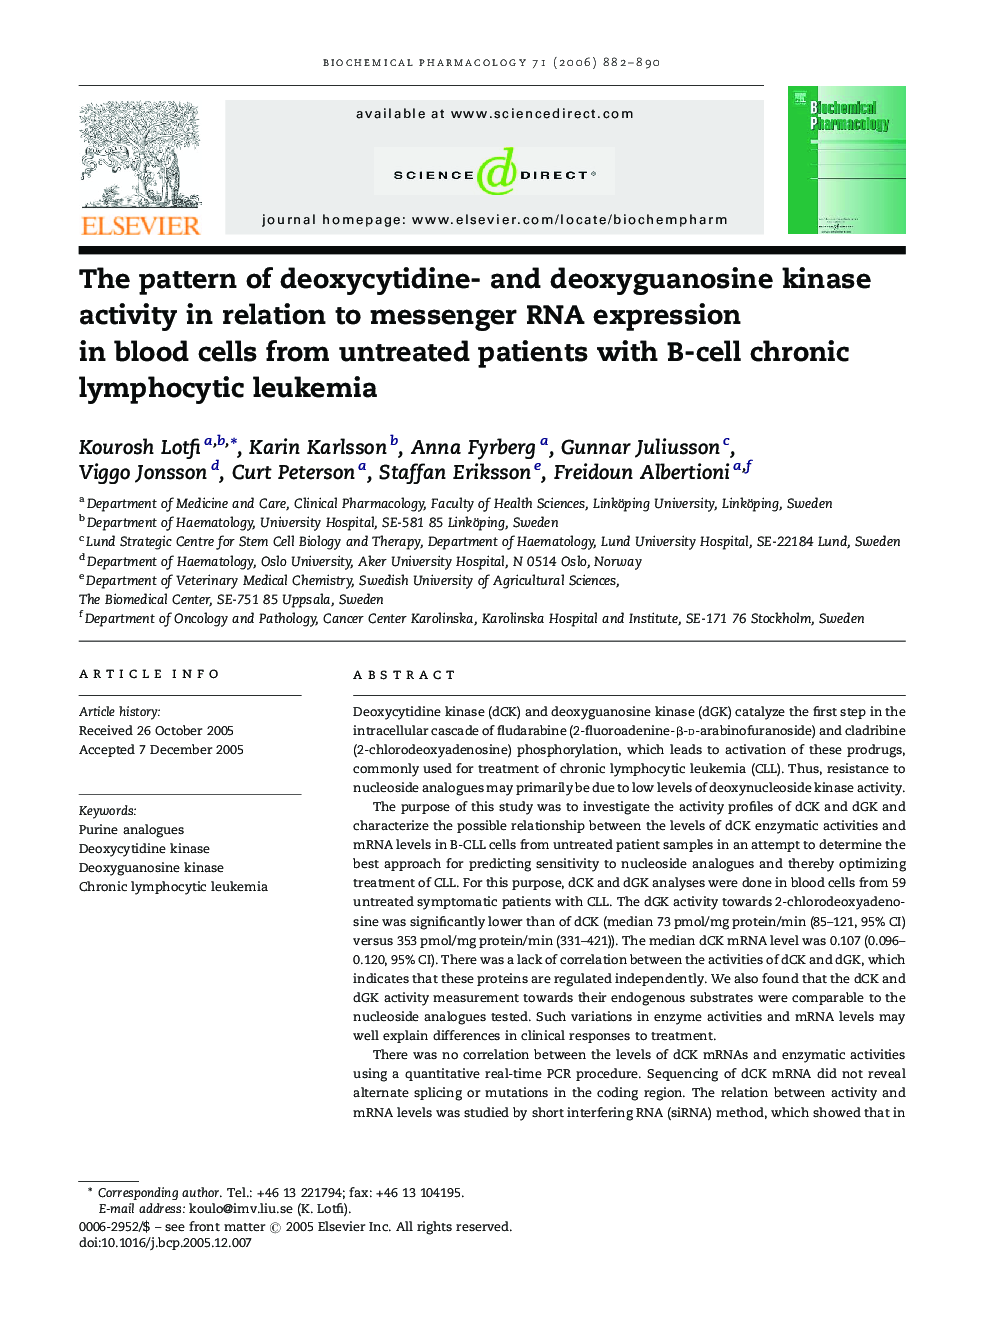 The pattern of deoxycytidine- and deoxyguanosine kinase activity in relation to messenger RNA expression in blood cells from untreated patients with B-cell chronic lymphocytic leukemia